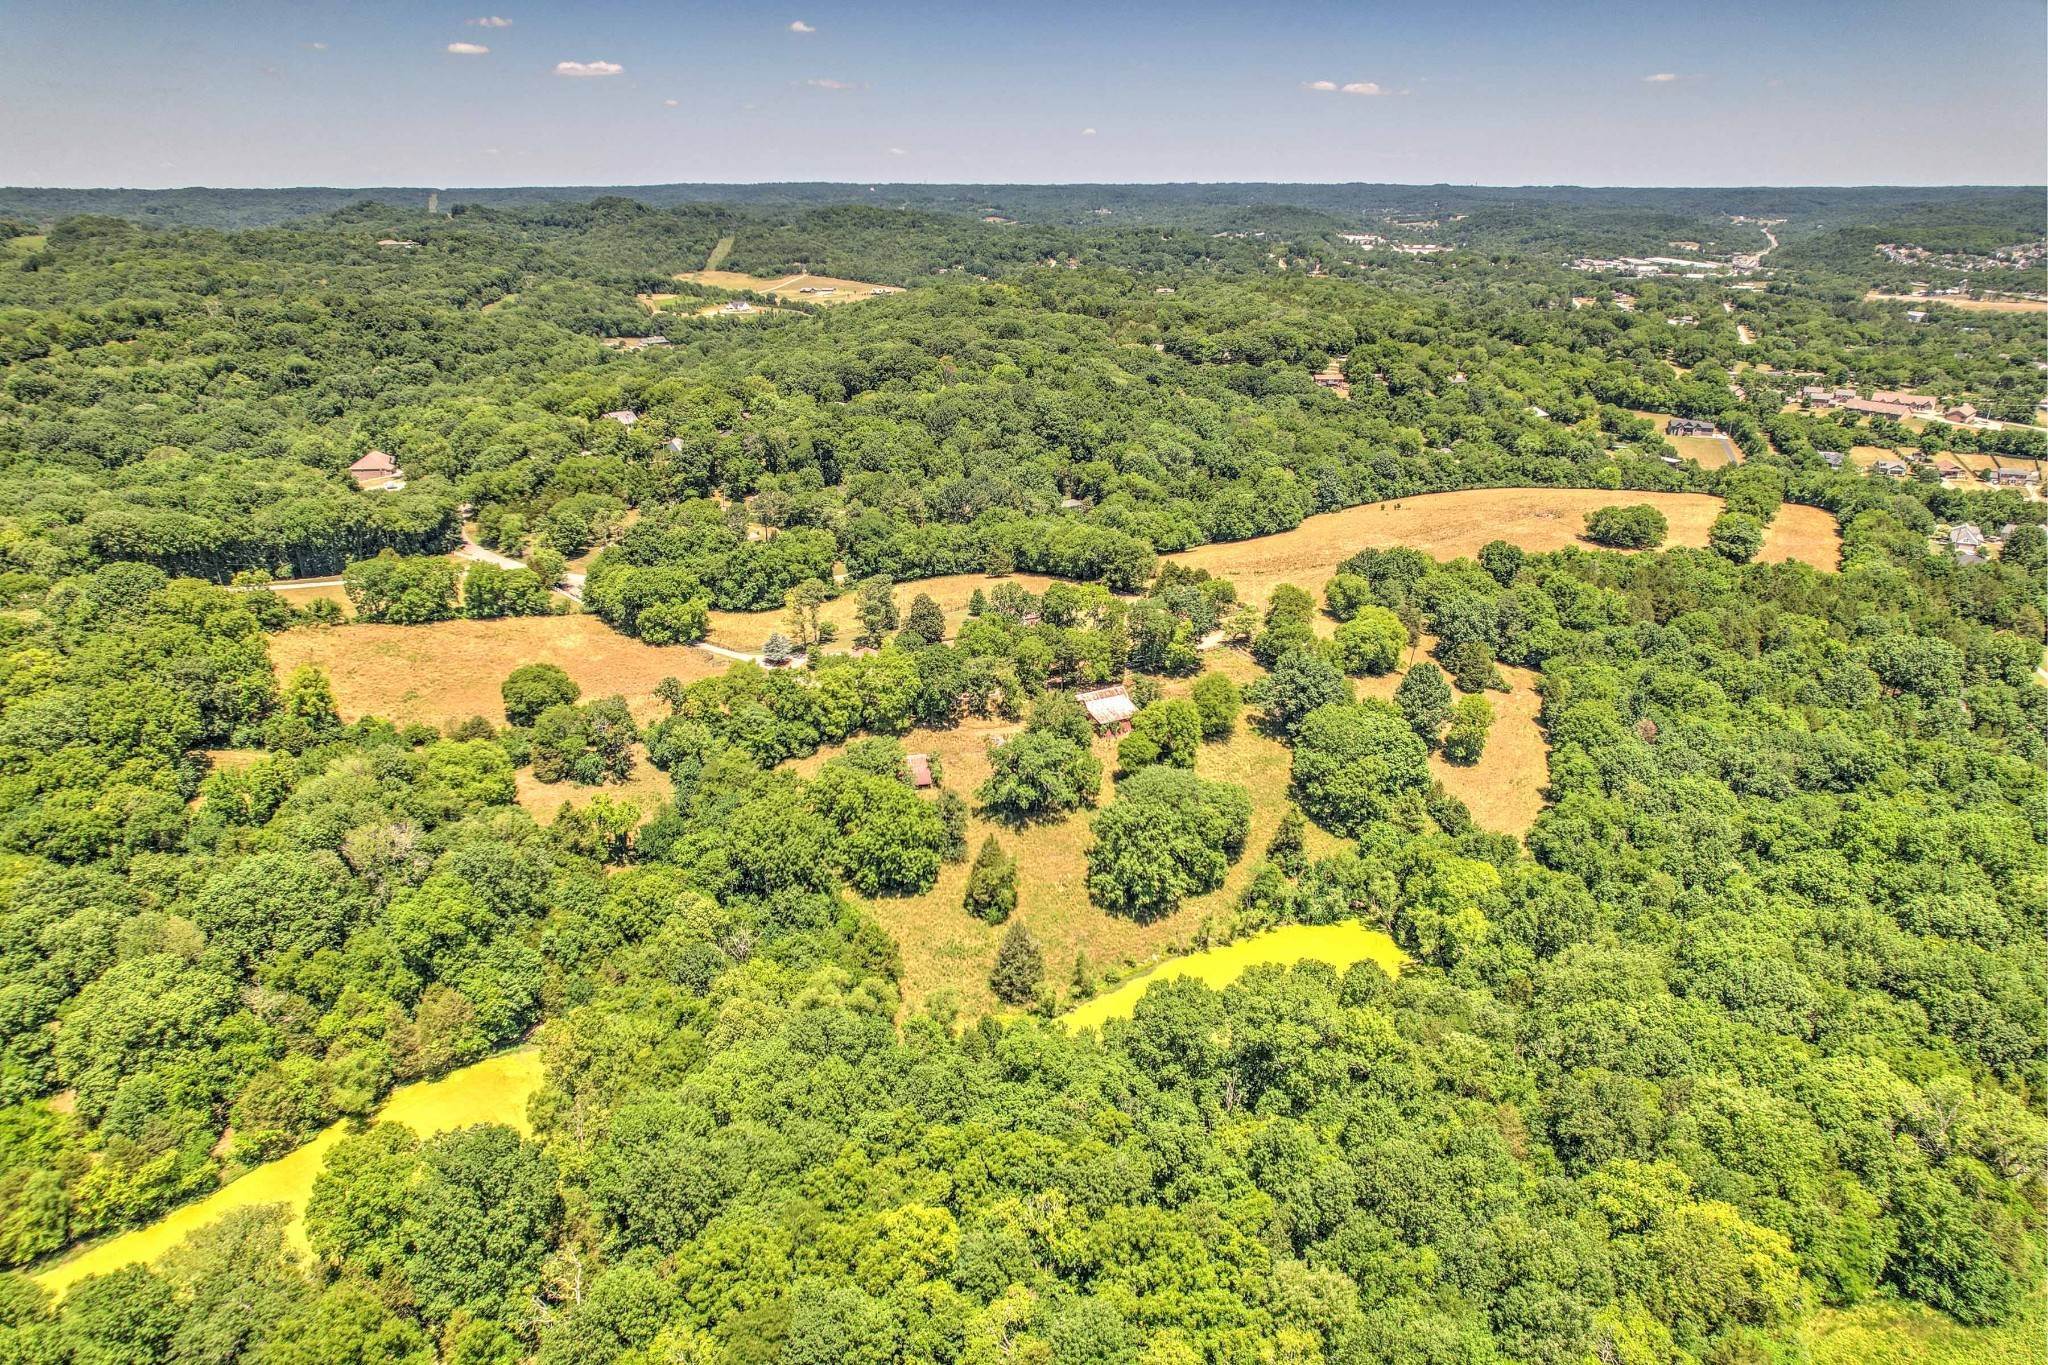 17. Land for Sale at 466 Moncrief Avenue Goodlettsville, Tennessee 37072 United States